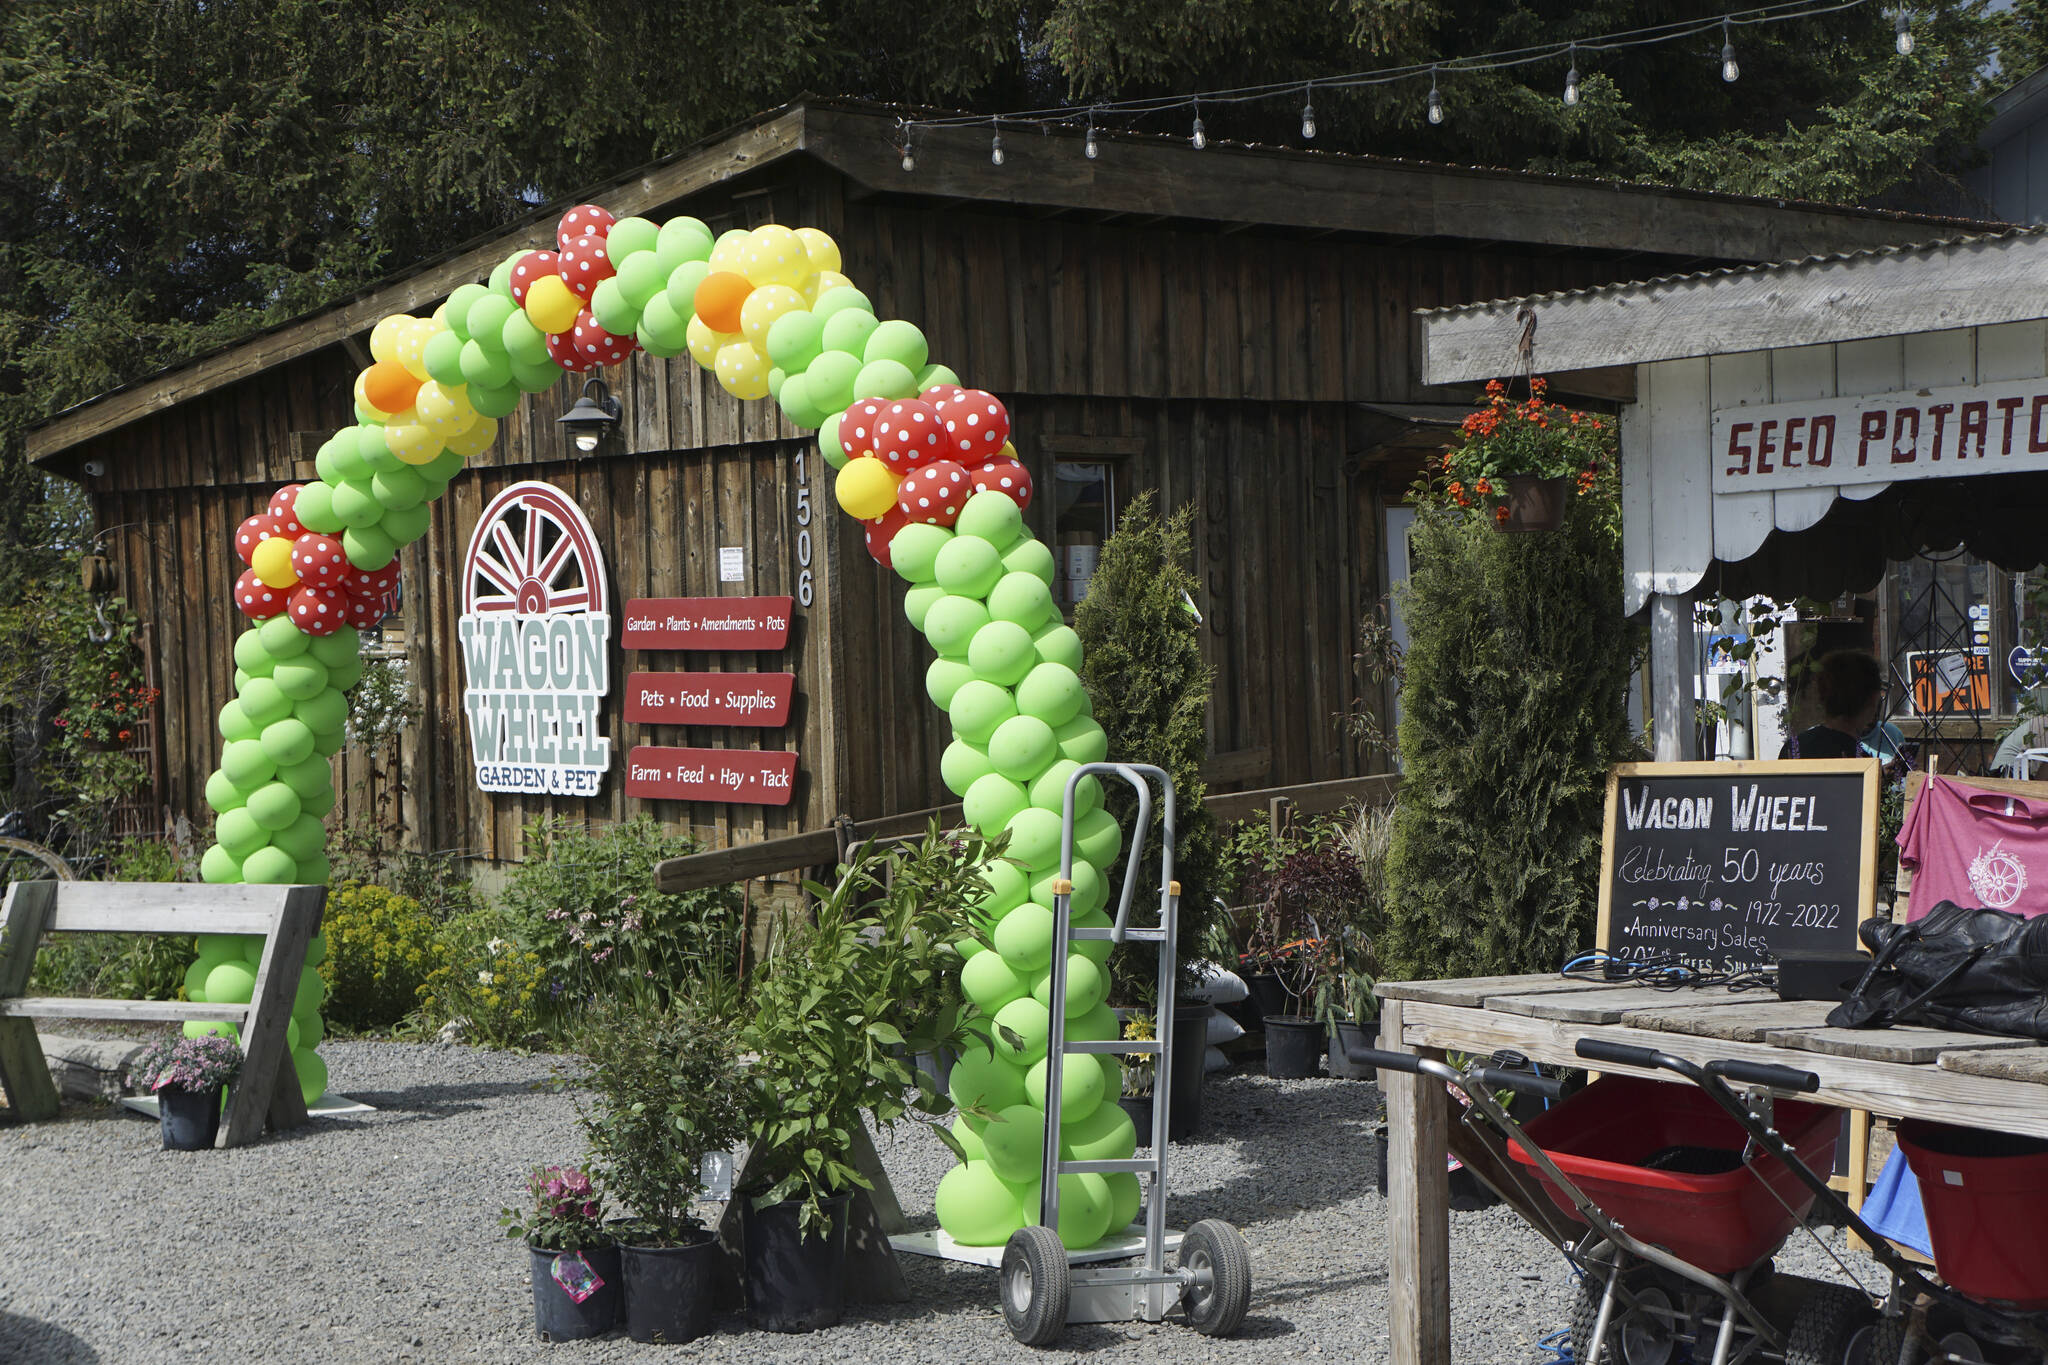 An arch of balloons decorates the entrance to Wagon Wheel Garden & Pet on its 50th anniversary celebration on Friday, June 10, 2022, in Homer, Alaska. (Photo by Michael Armstrong/Homer News)